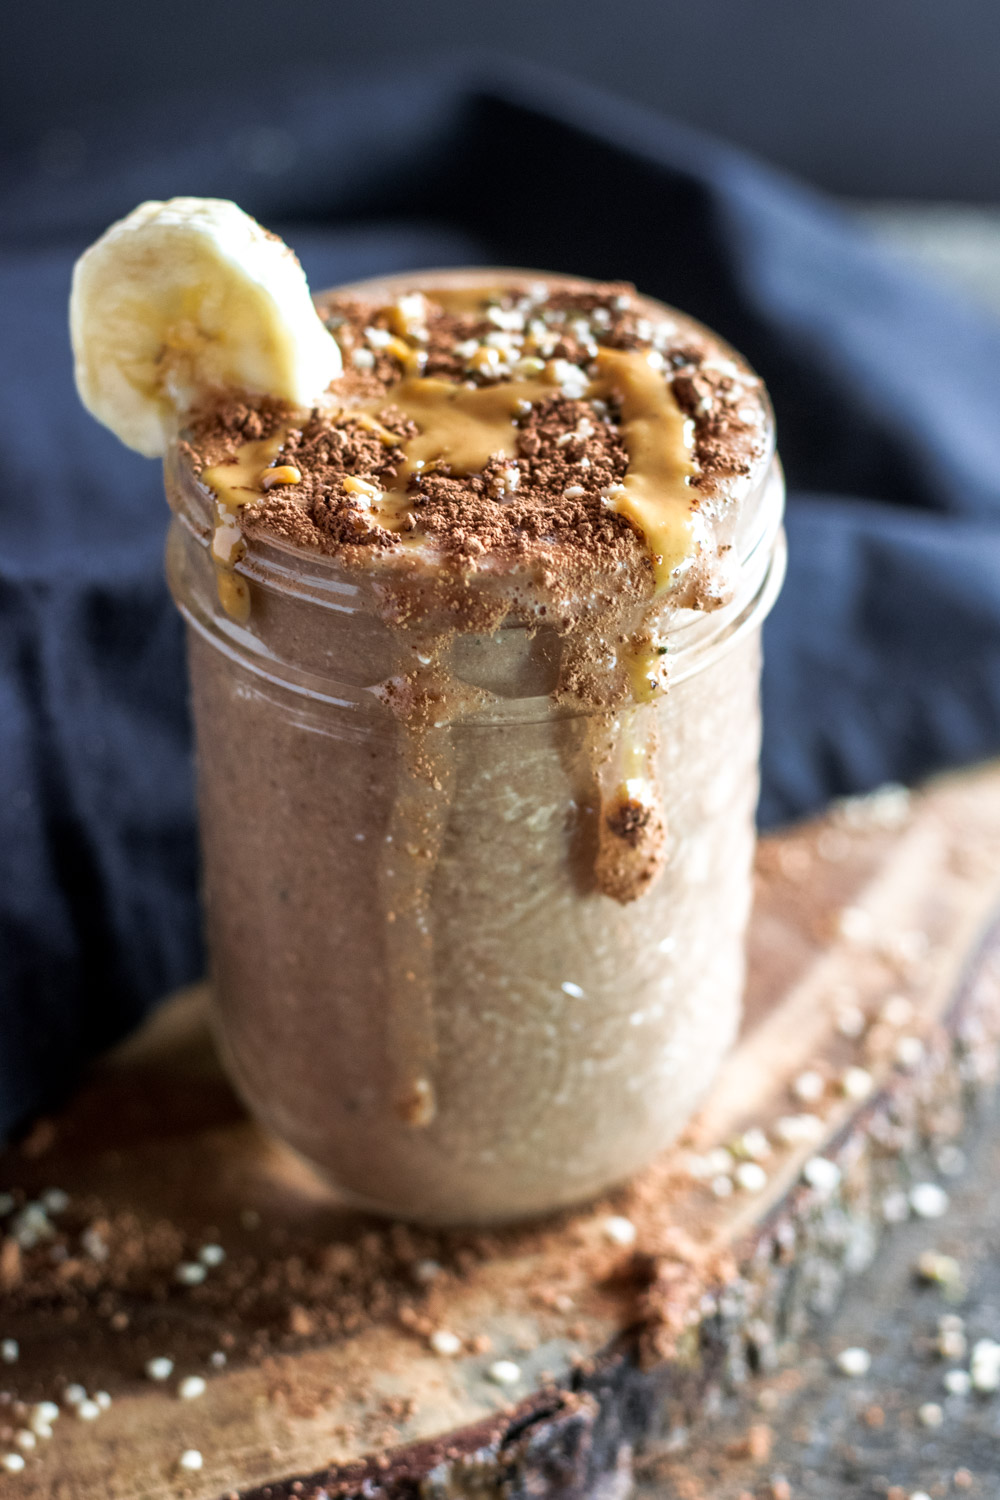 Chocolate, peanut butter and oat milk smoothie